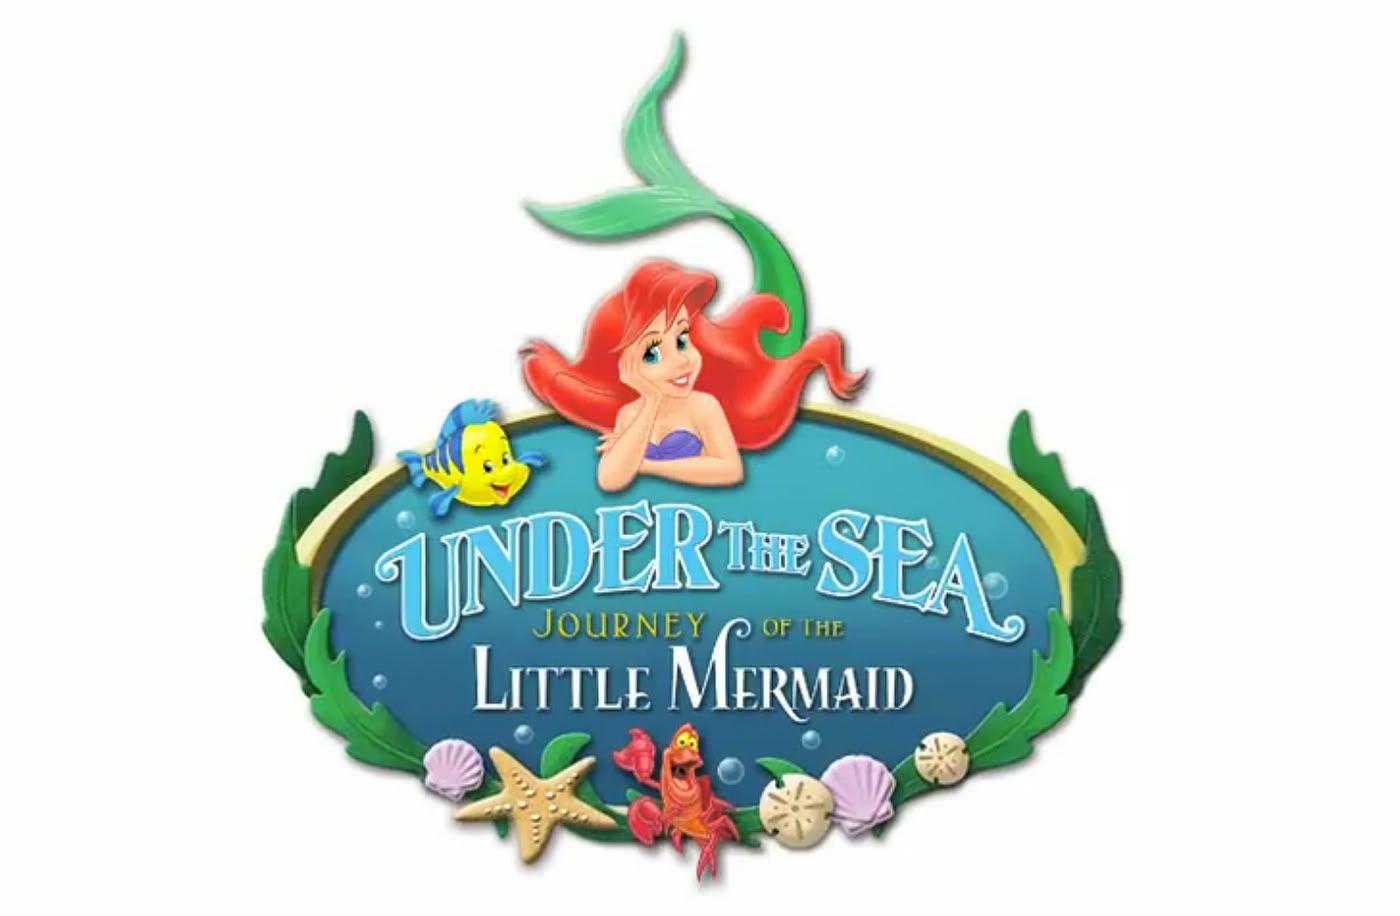 Disney Little Mermaid Logo - Disney and more: New Imagineering video reveals more about WDW